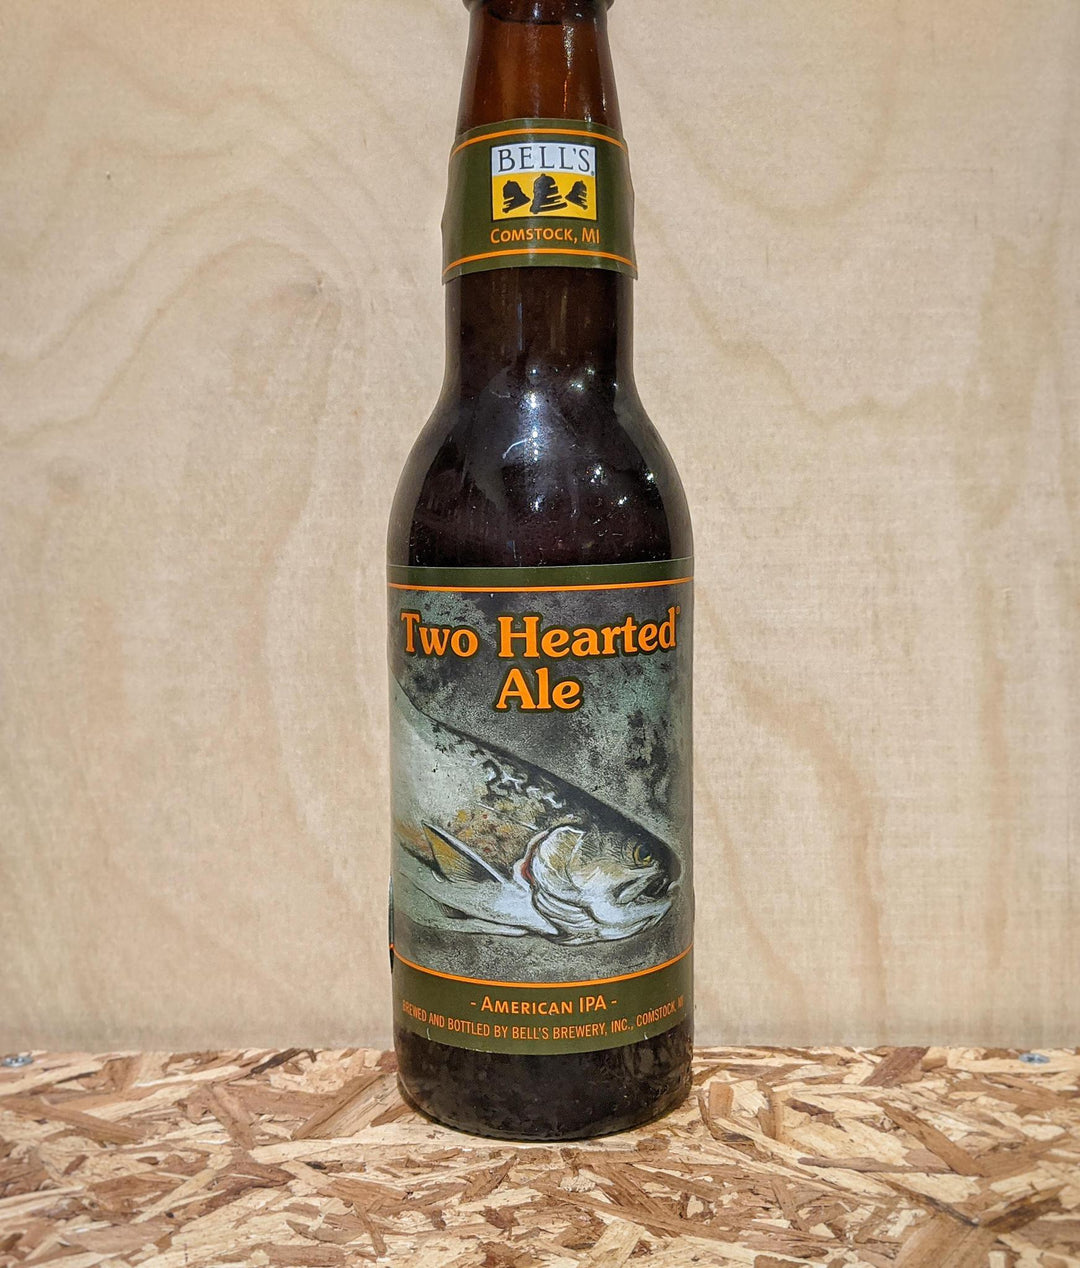 Bell's Two Hearted IPA (Comstock, MI)